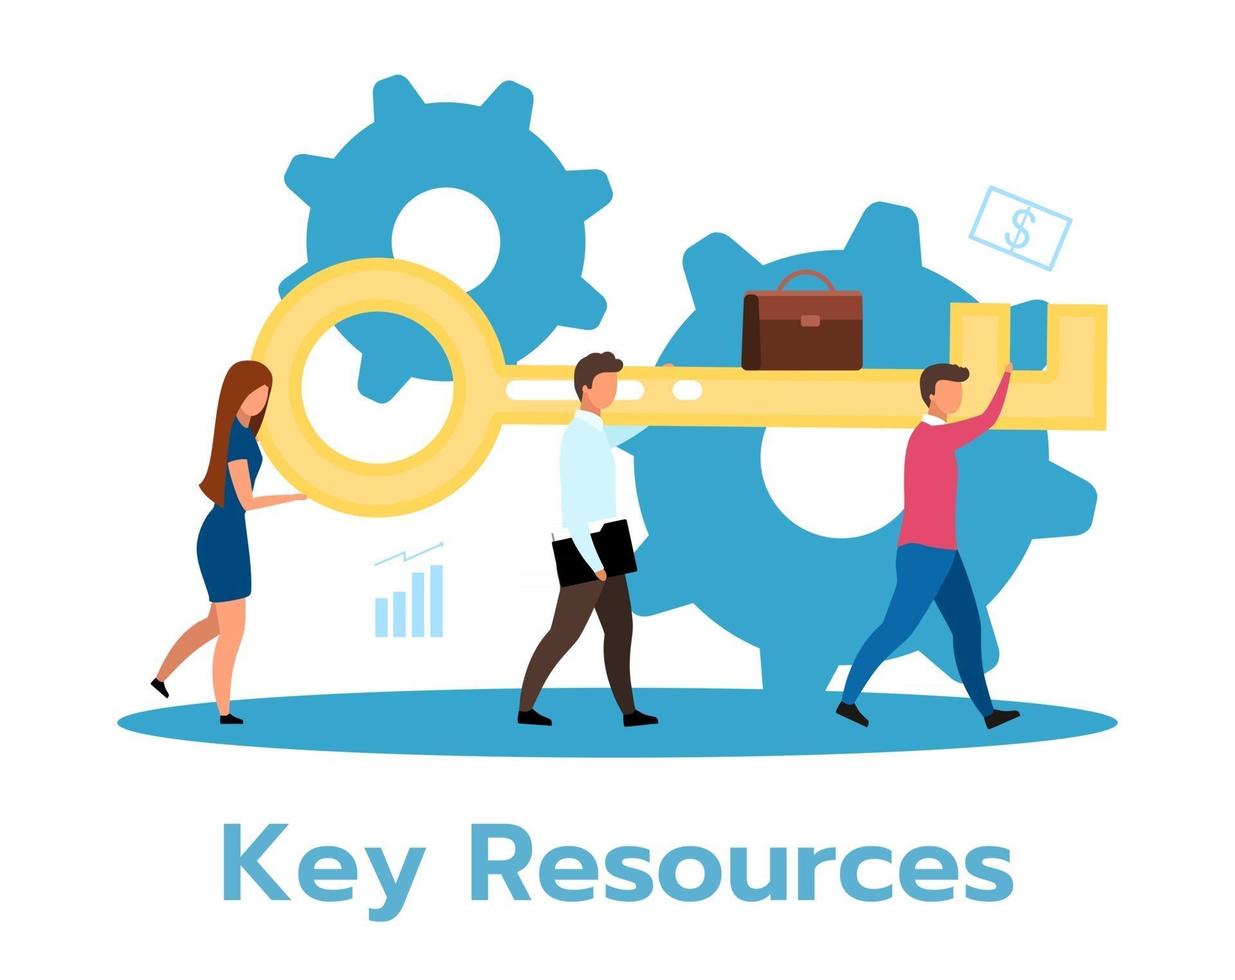 Key resources flat vector illustration. Effective company functioning. Organization management assets. Business model. Human resource. Teamwork. Isolated cartoon character on white background